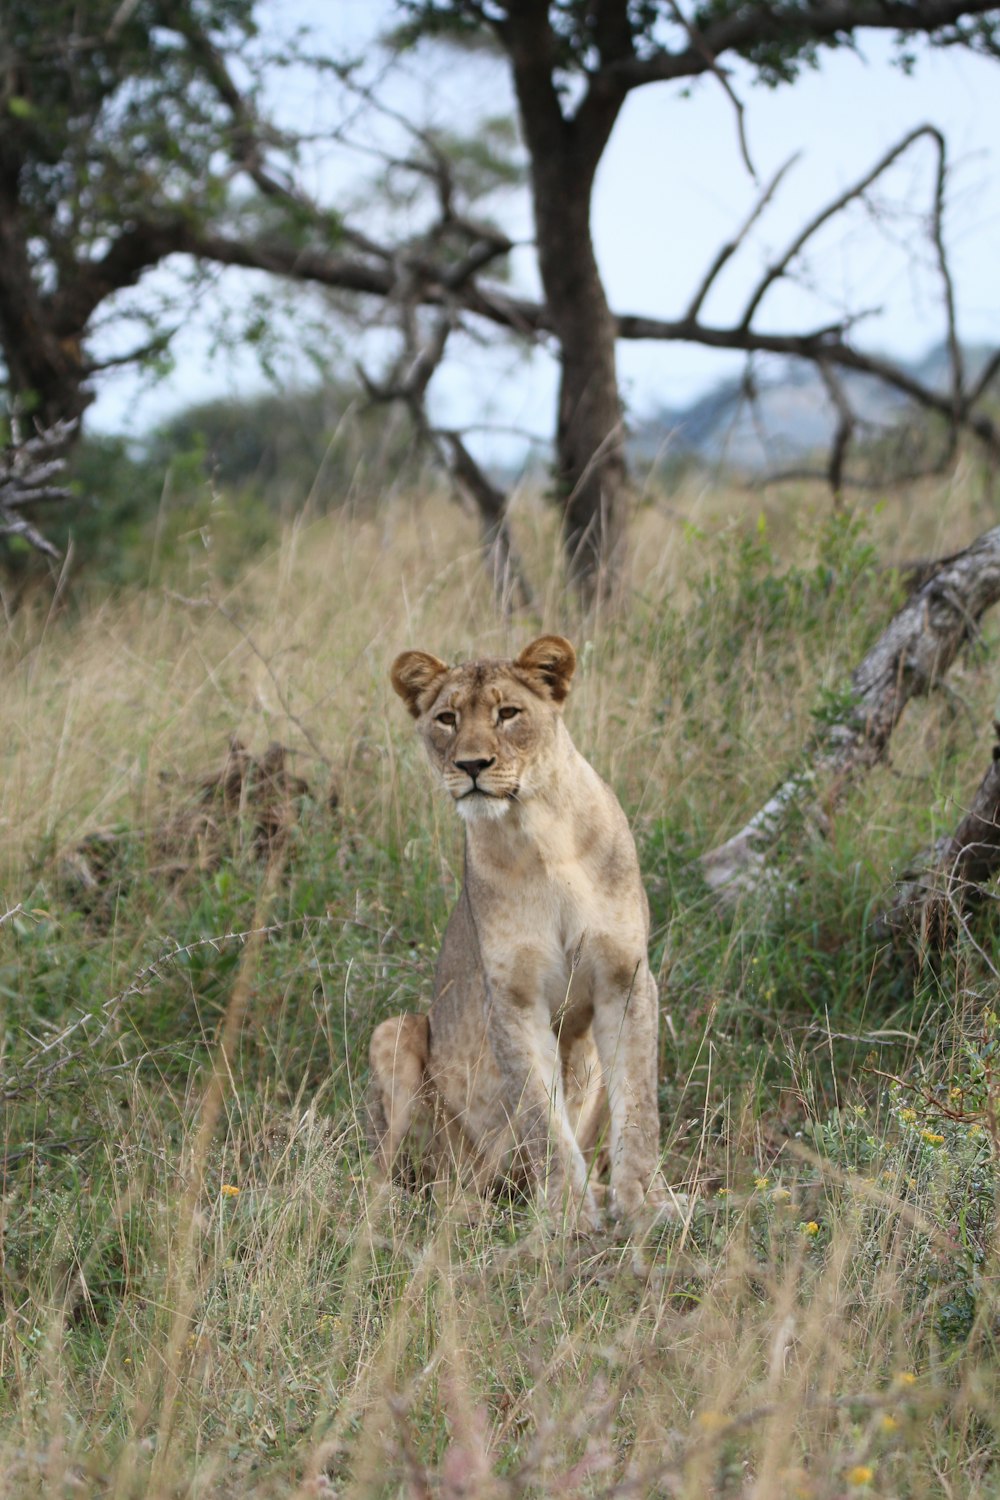 lioness sitting on grass near trees at daytime